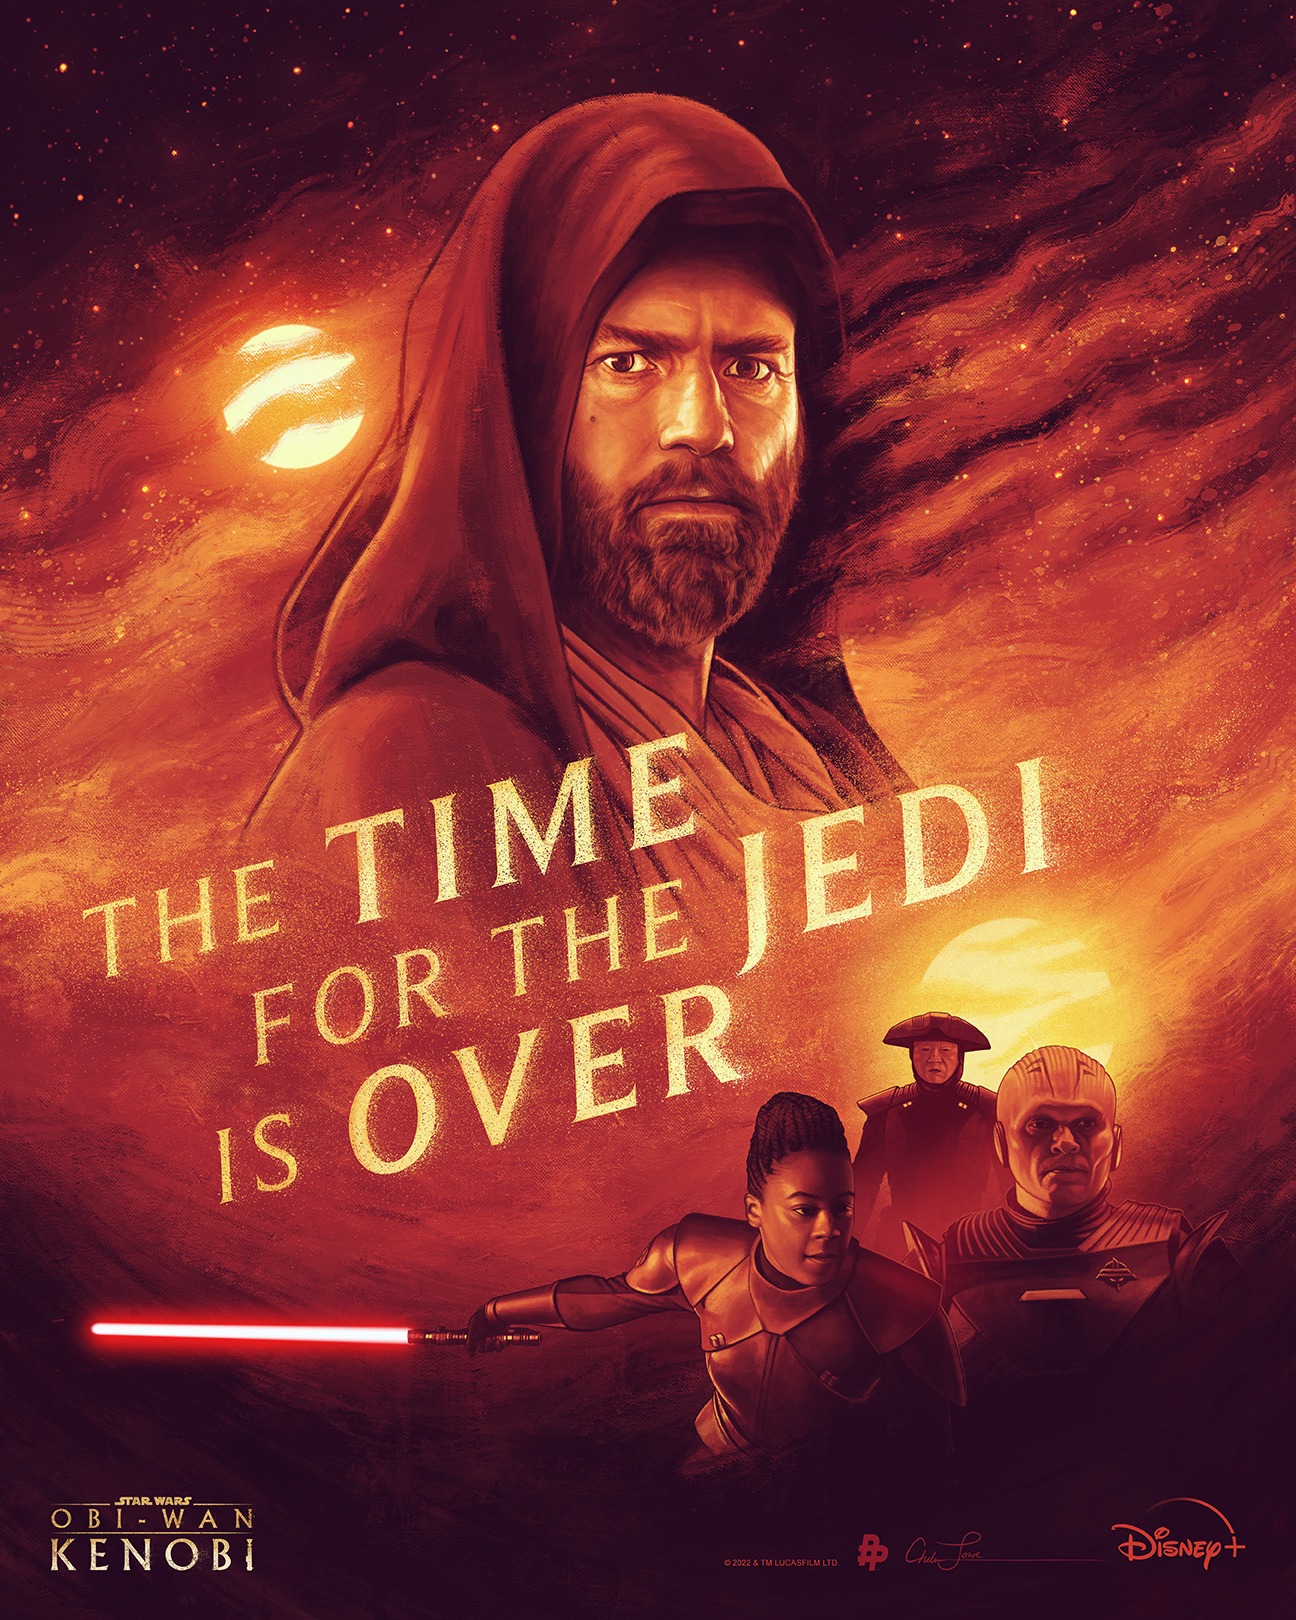 Obi Wan Kenobi | The time for the Jedi is over | Promotional poster